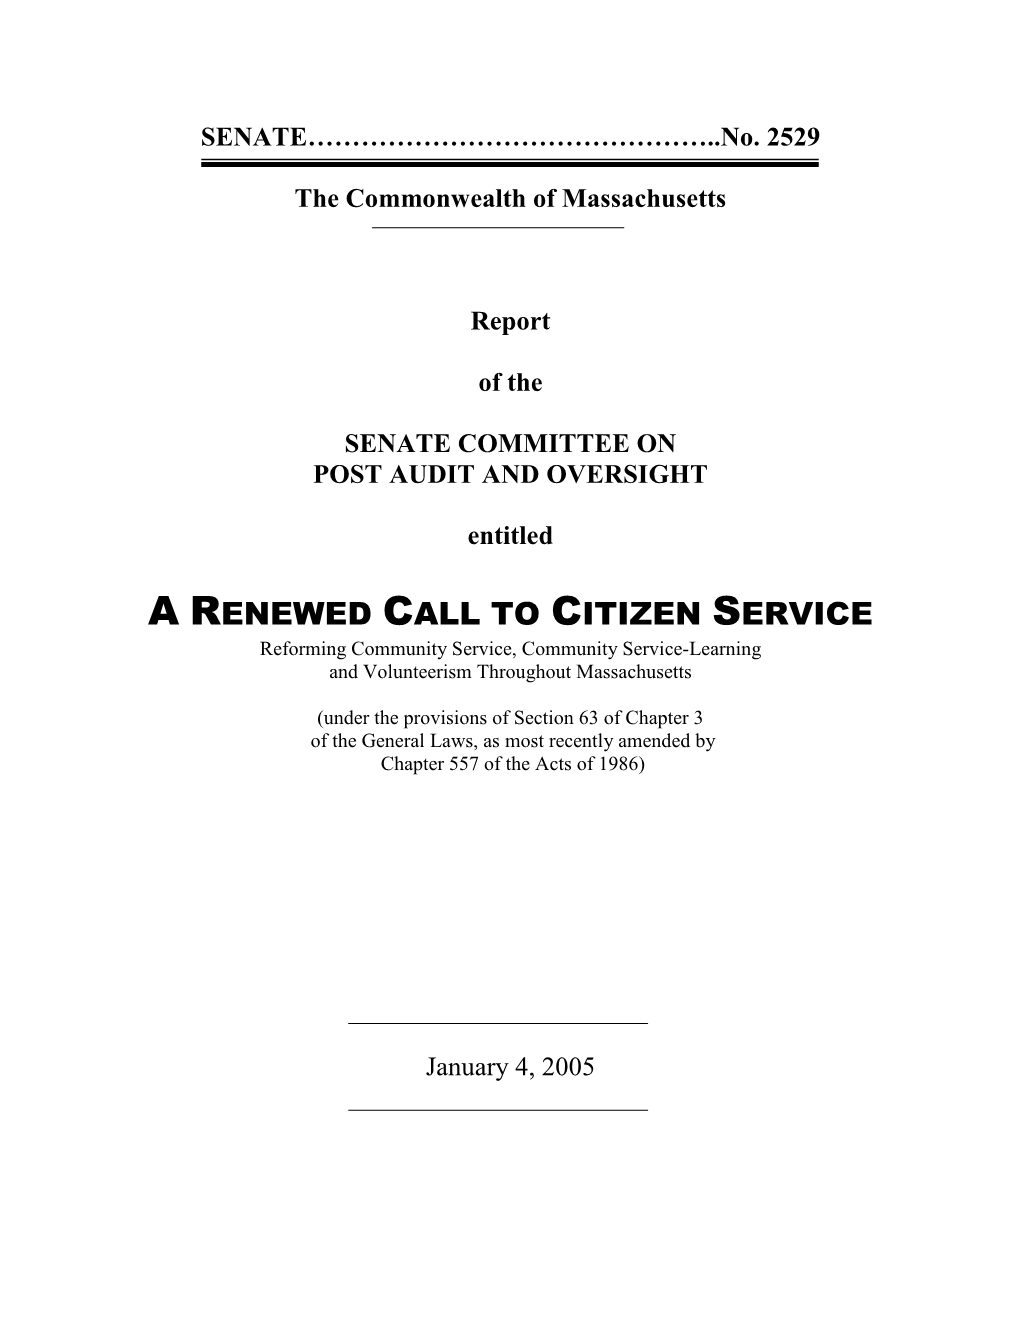 A RENEWED CALL to CITIZEN SERVICE Reforming Community Service, Community Service-Learning and Volunteerism Throughout Massachusetts